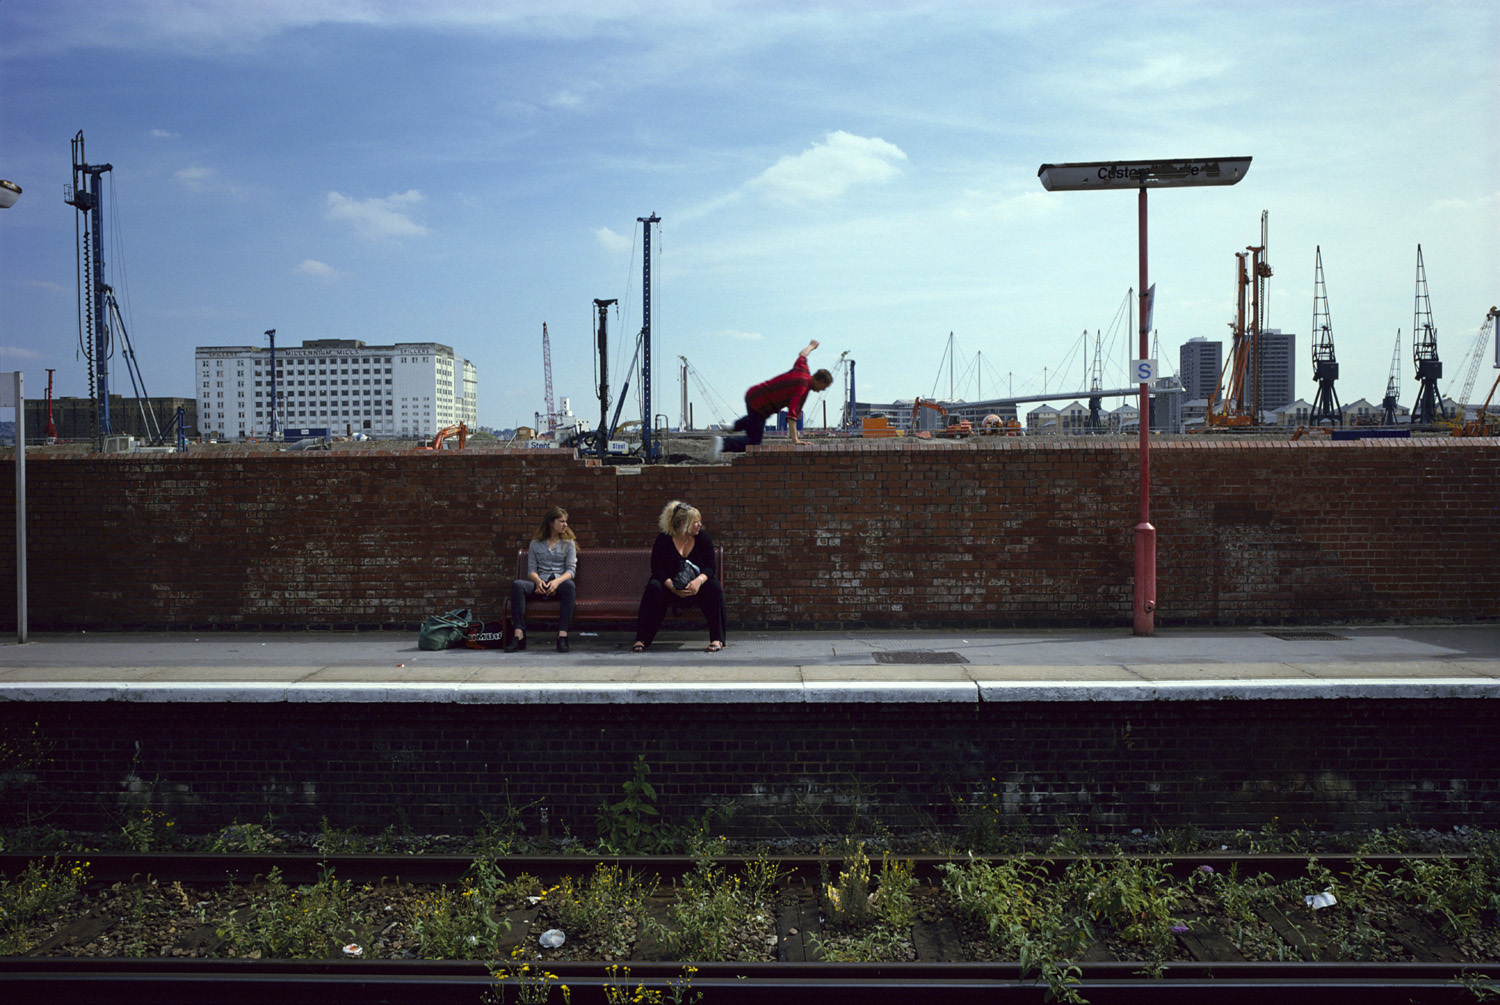 Two women sit on a bench at a train station platform with industrial cranes and buildings in the background, while a man in mid-air vaults over a brick wall.